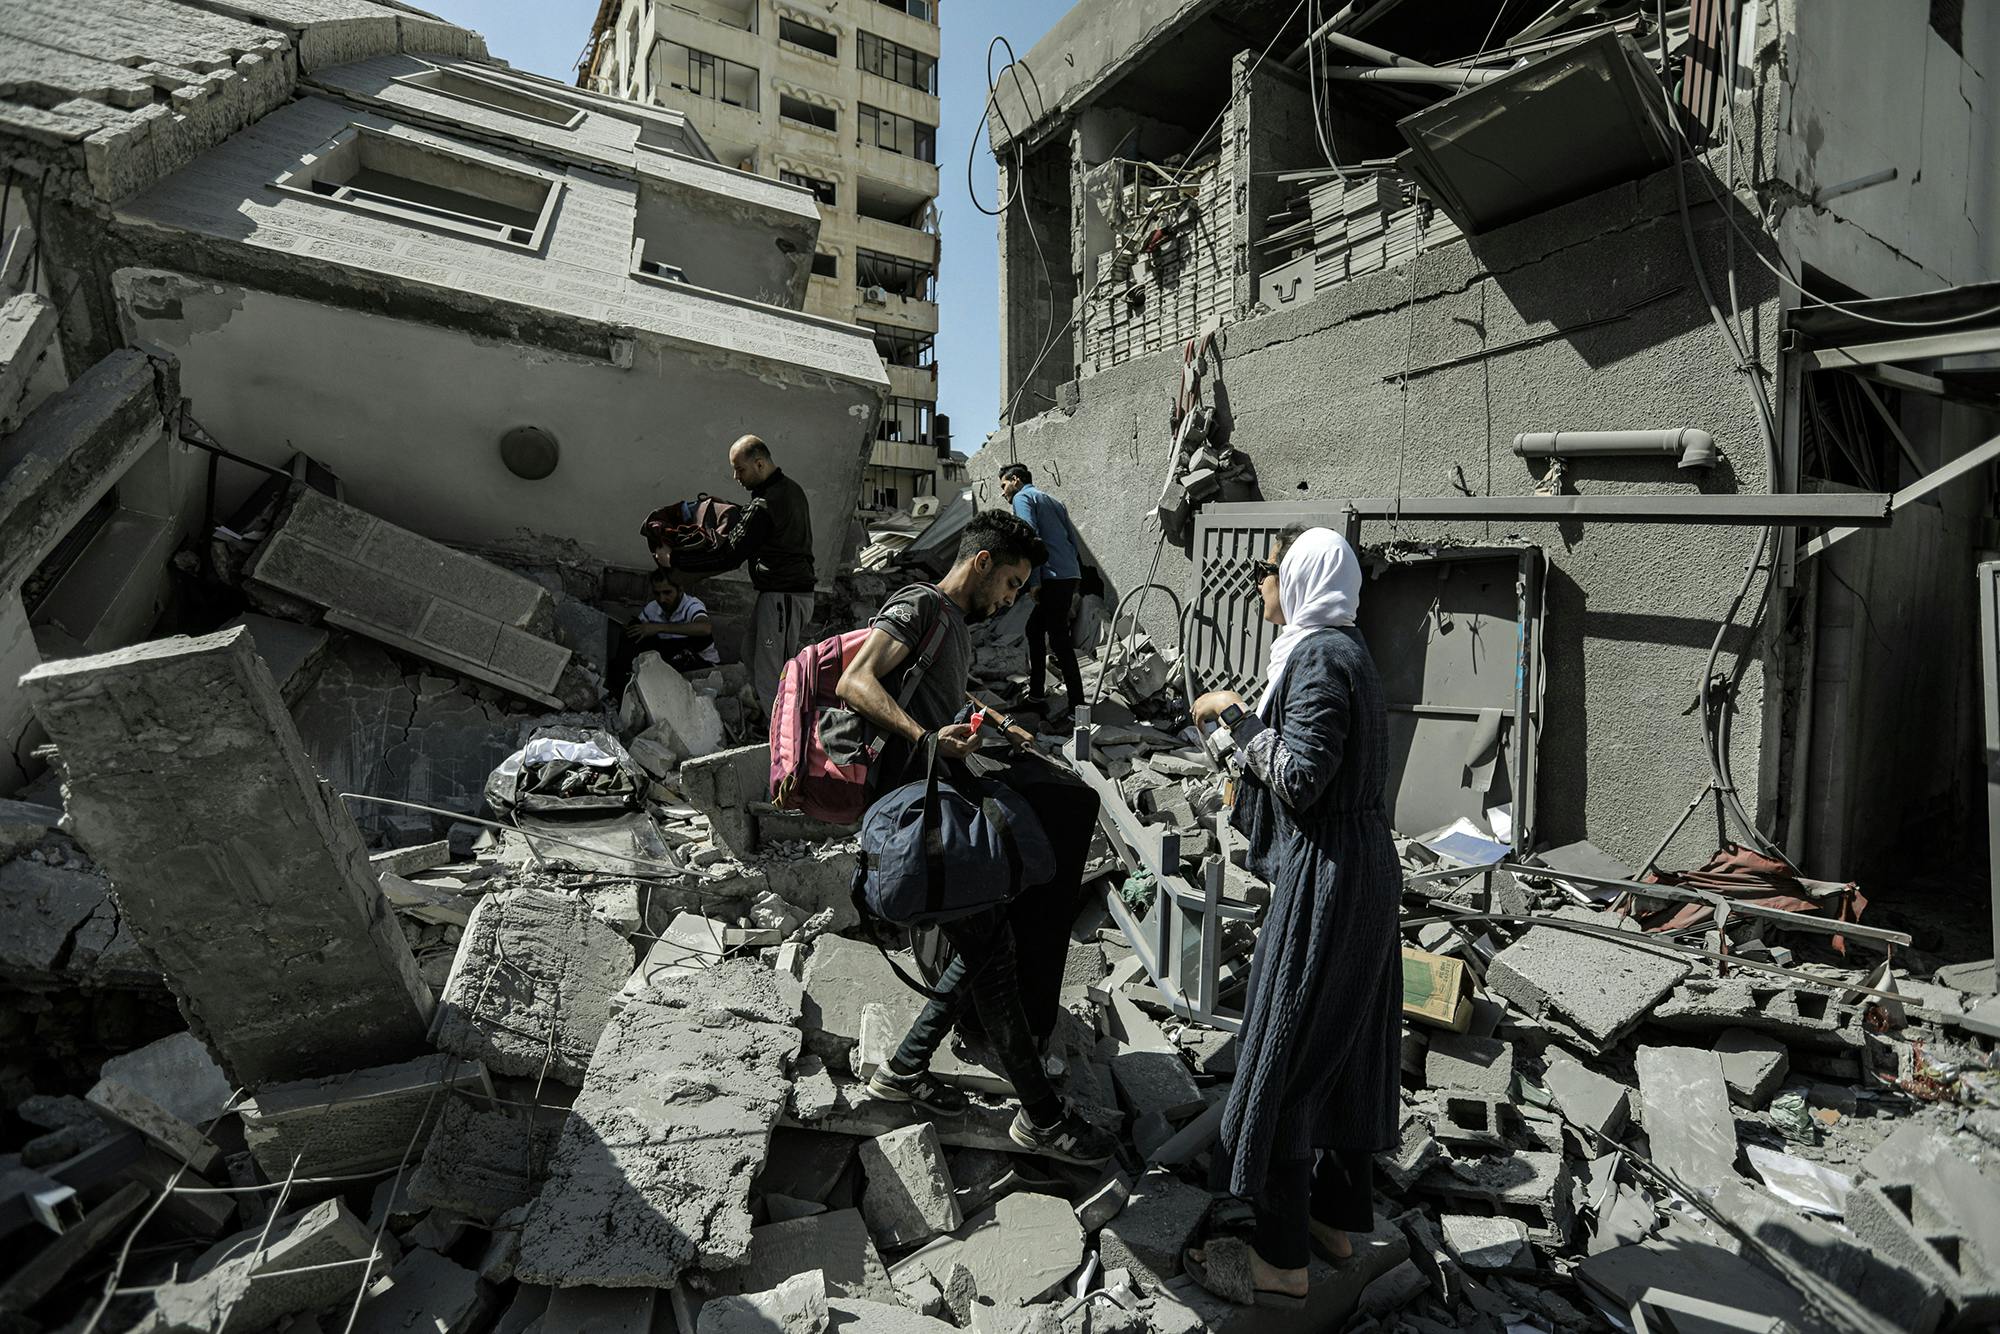 People climbing over the rubble of a destroyed building.